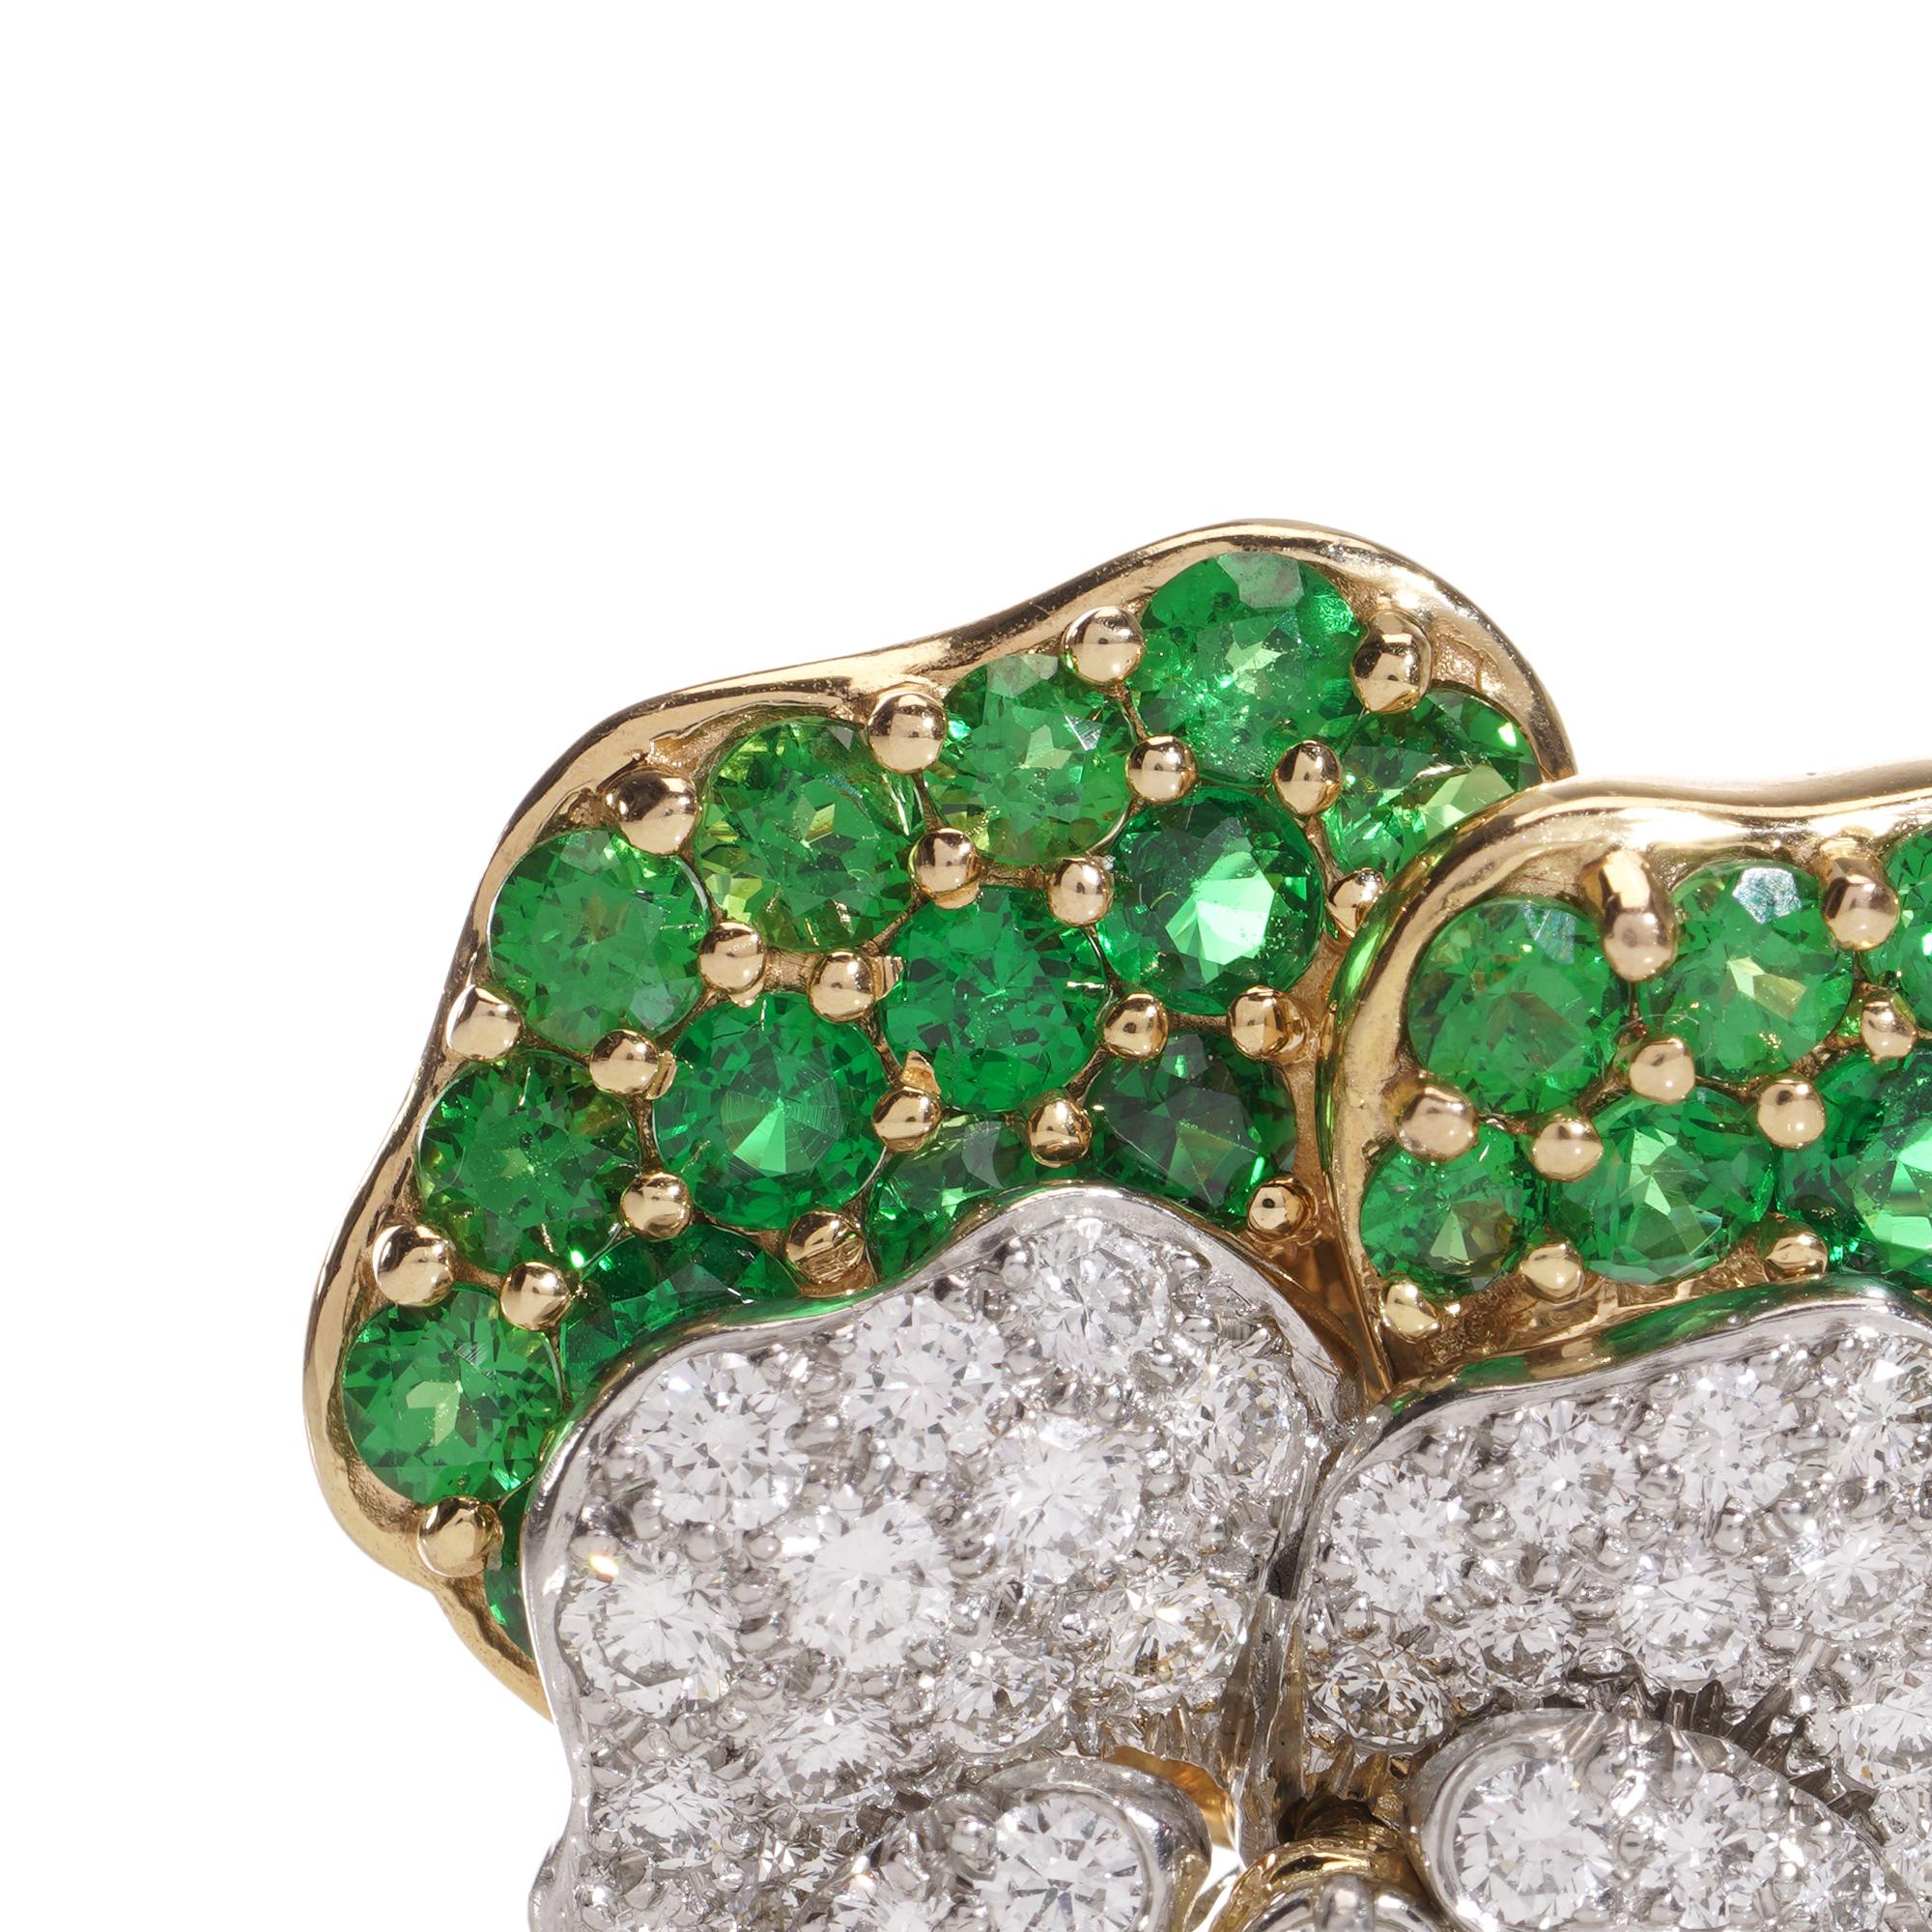 Embrace timeless elegance with this vintage Tiffany & Co. Pansy Brooch.
Made in circa 1960.
Crafted in 18kt yellow gold and platinum, adorned with brilliant cut tsavorite garnets, diamonds, and sapphires.

Signed and numbered for authenticity.